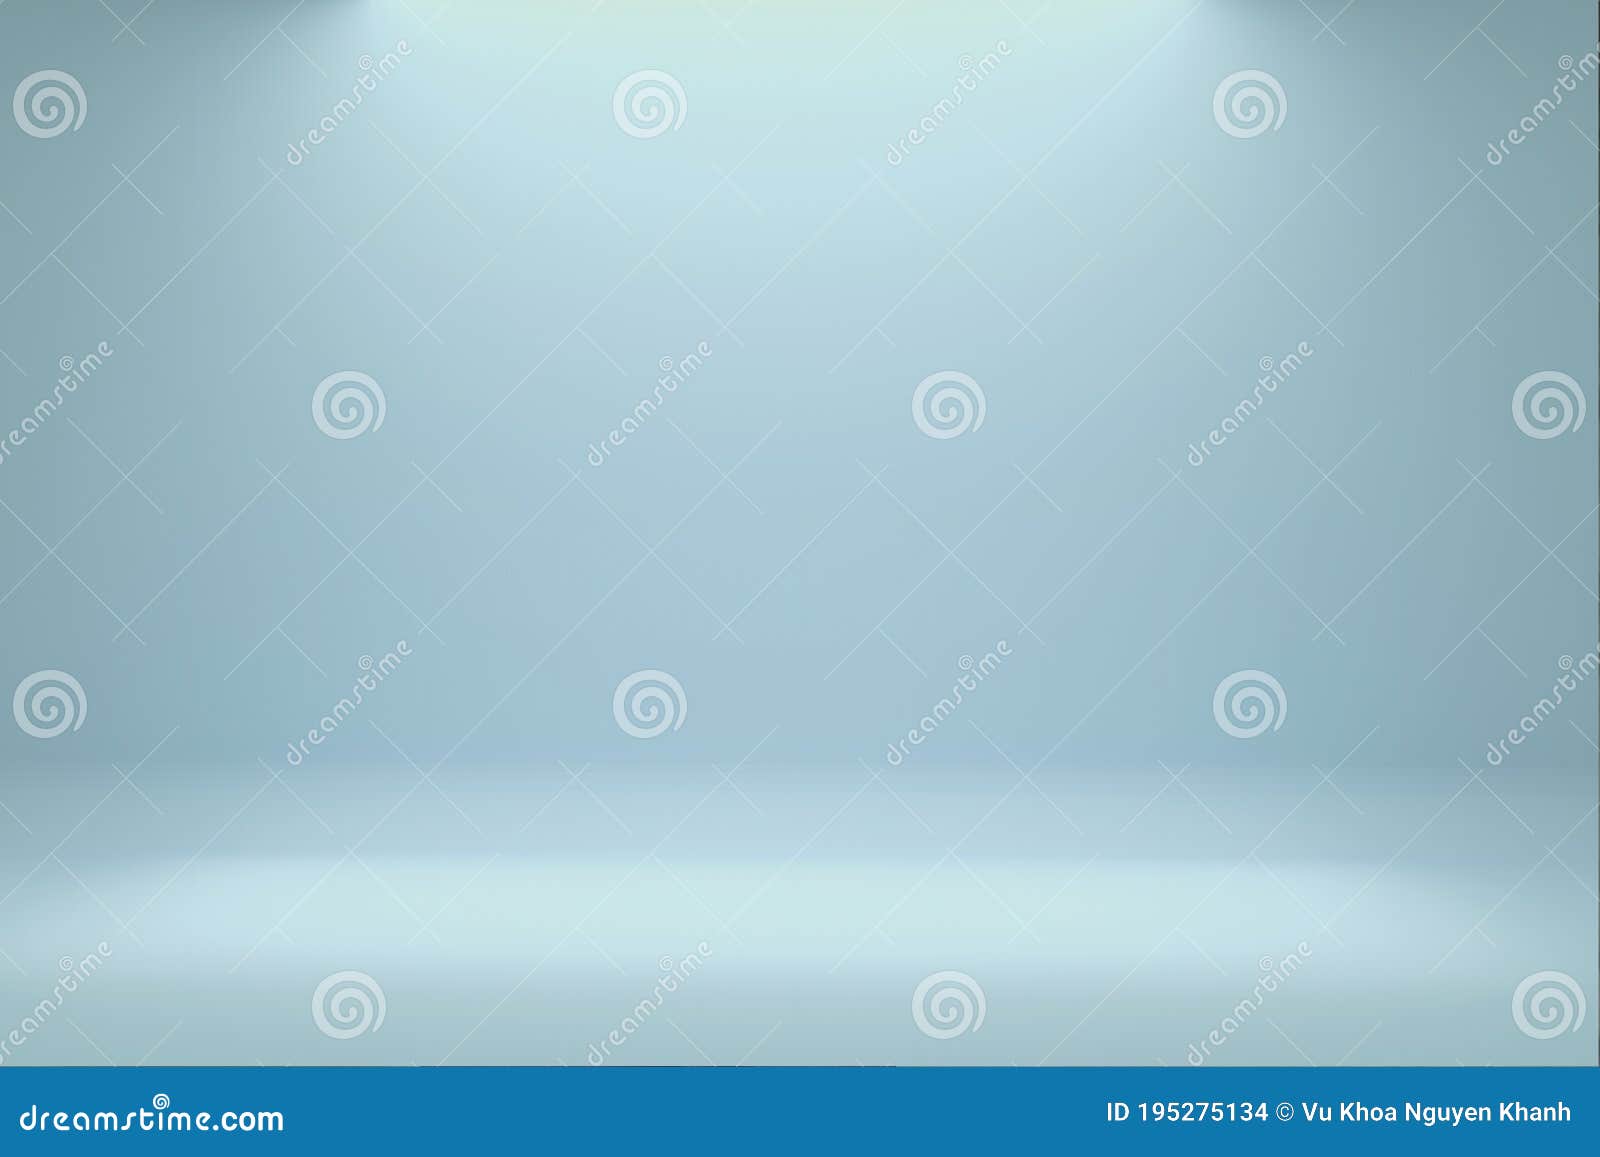 blank light blue gradient background with product display. white backdrop or empty studio with room floor. abstract background